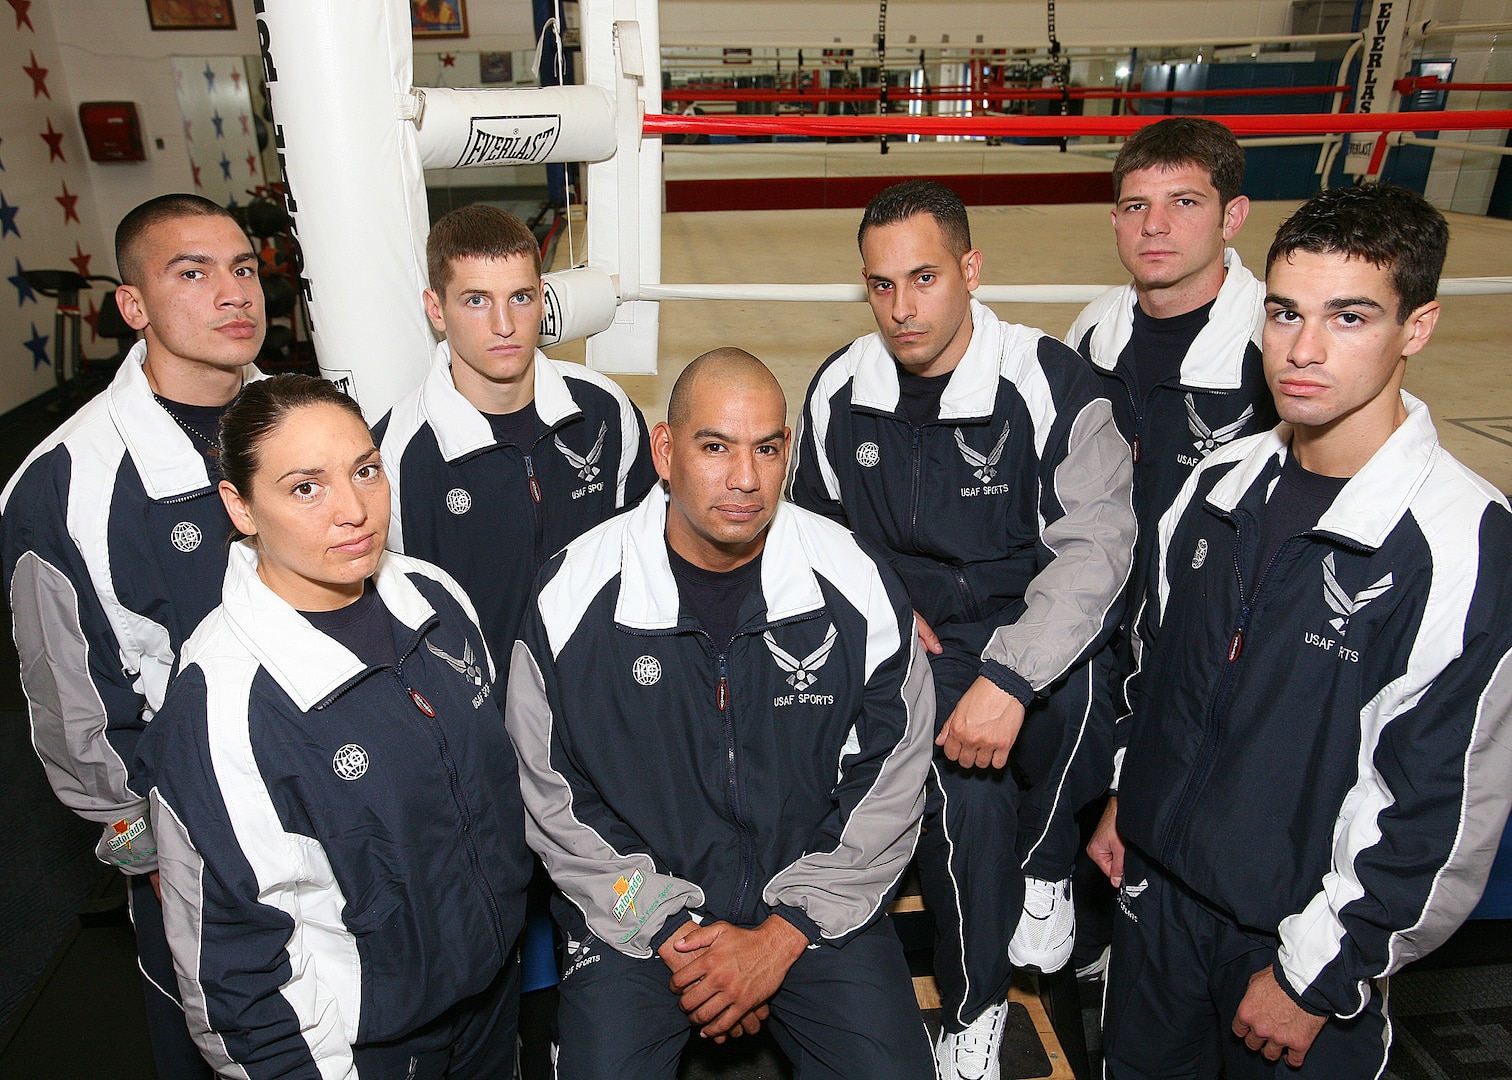 After roughly five weeks training at Lackland, the Air Force boxing team traveled to Fort Huachuca, Ariz., May 1 to compete in the Armed Forces Boxing Championship. (U.S. Air Force photo/Robbin Cresswell)